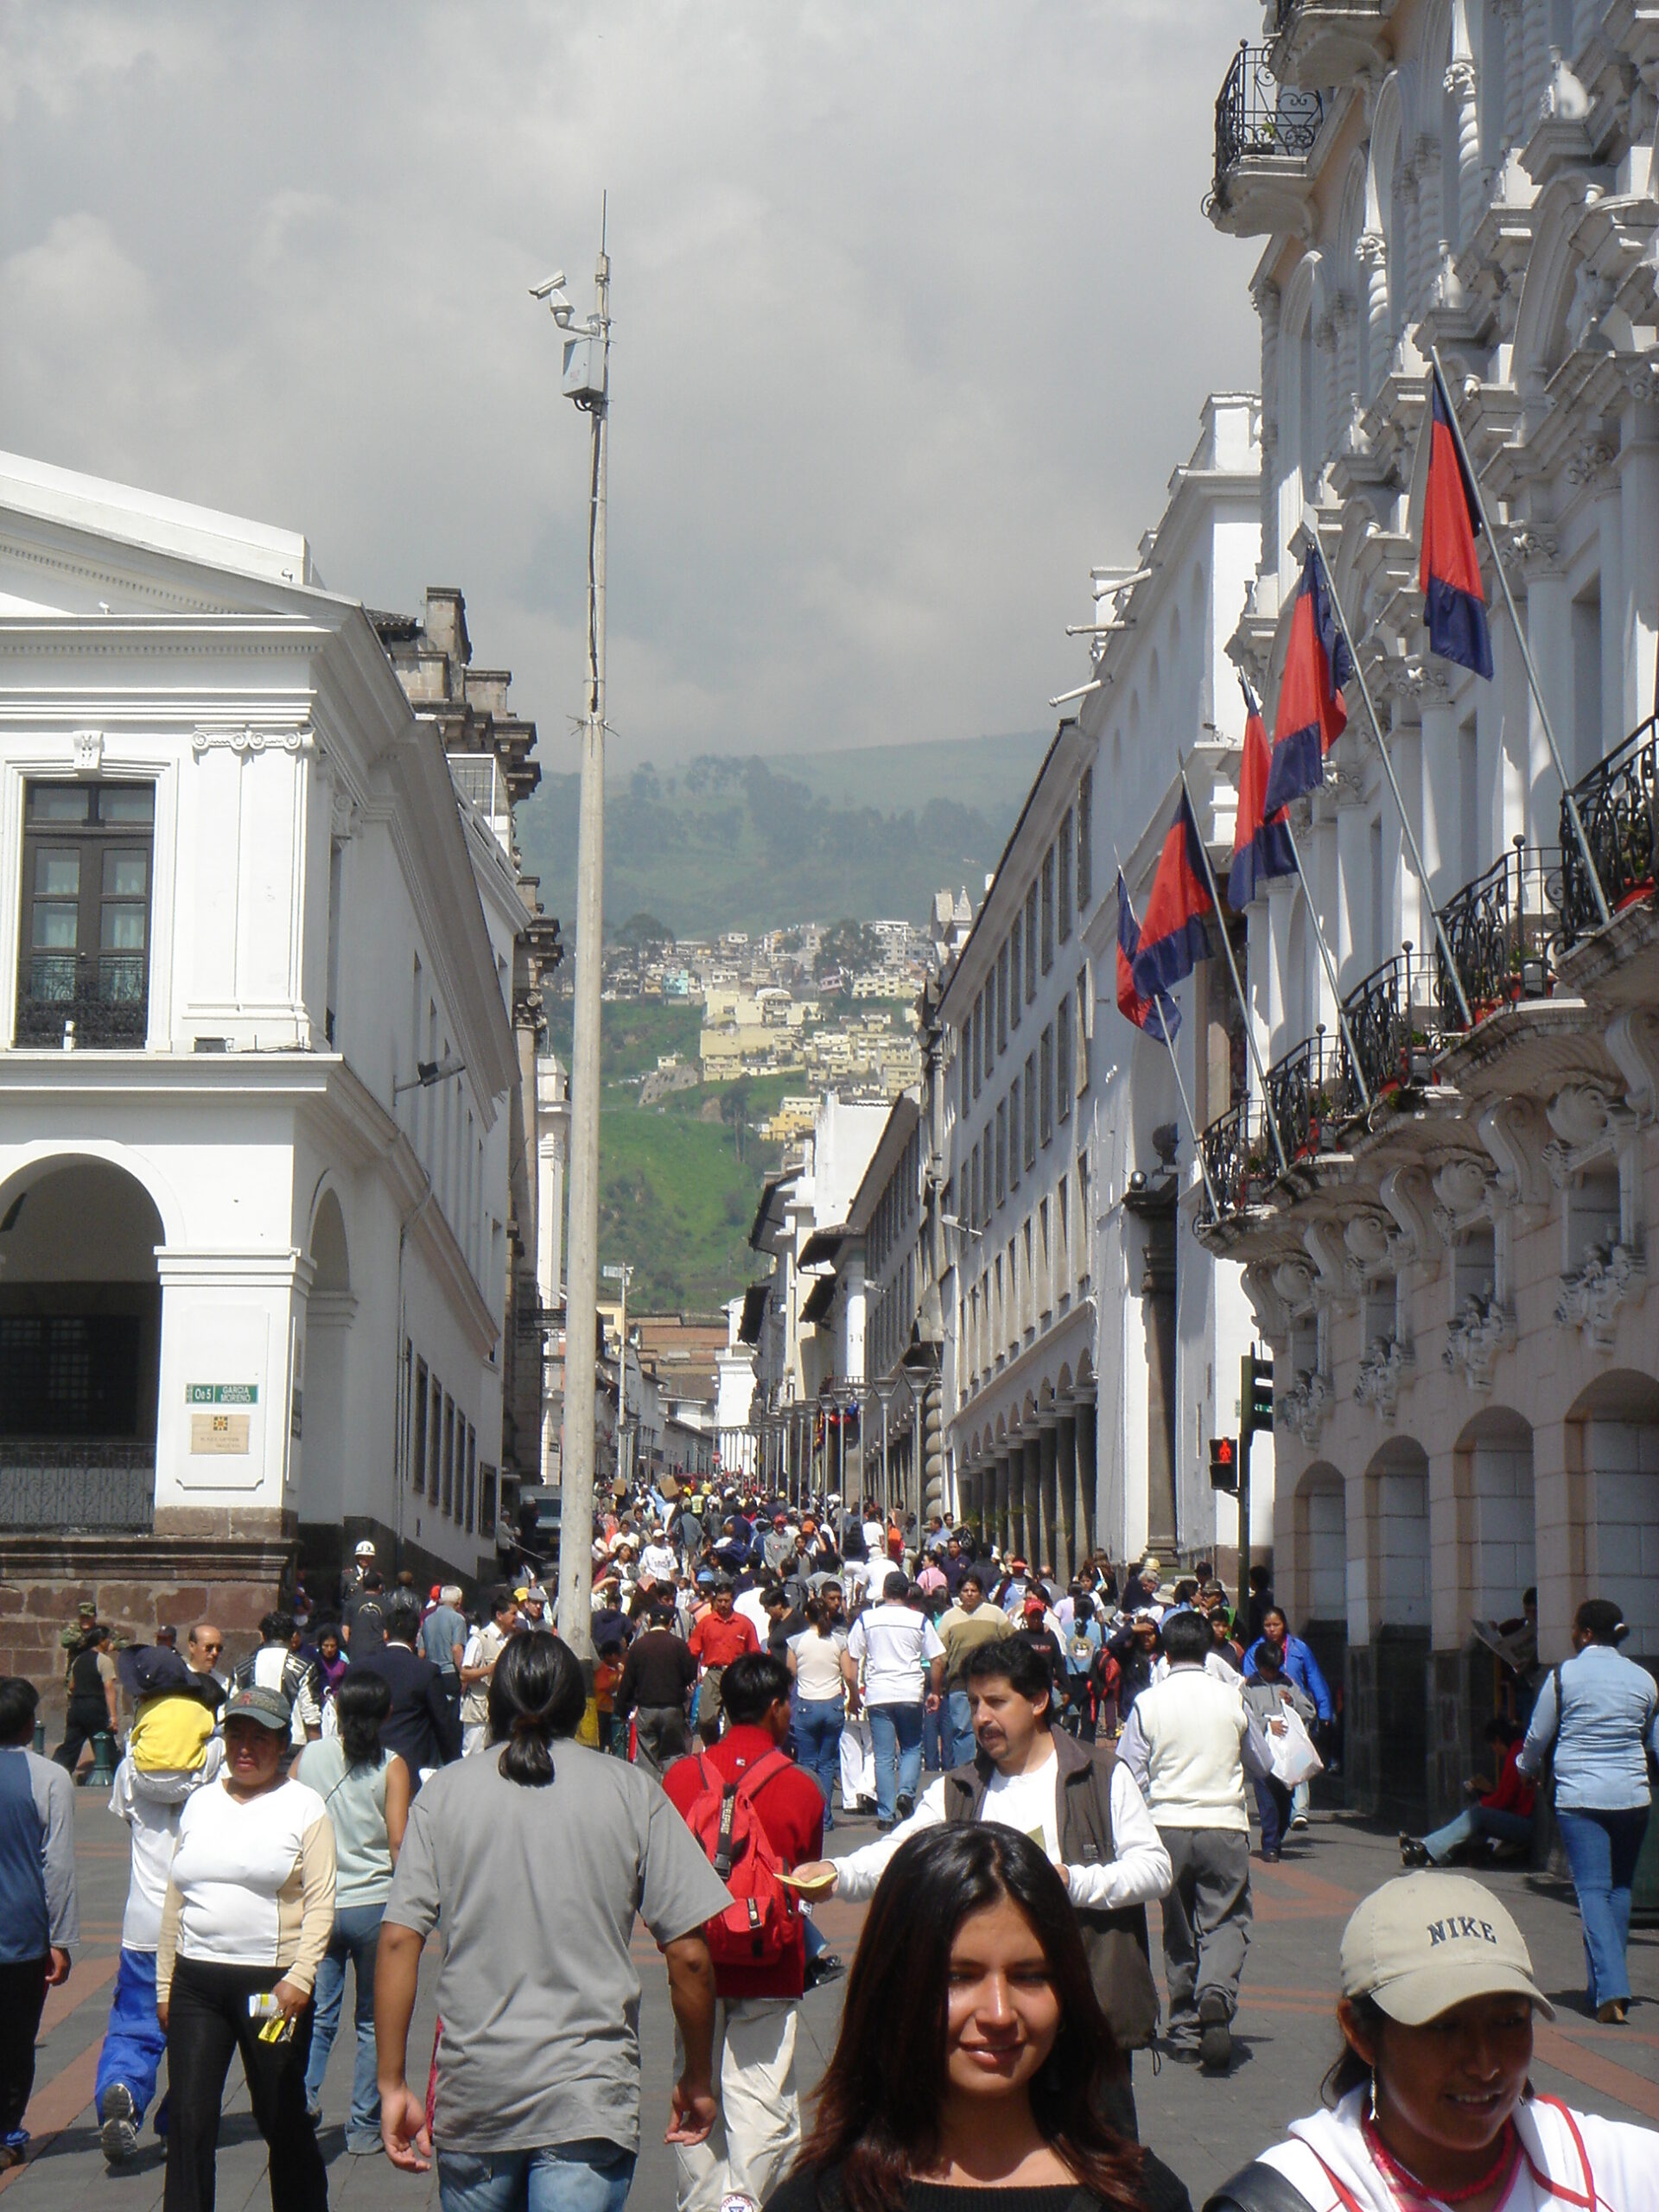 Downtown Quito 2